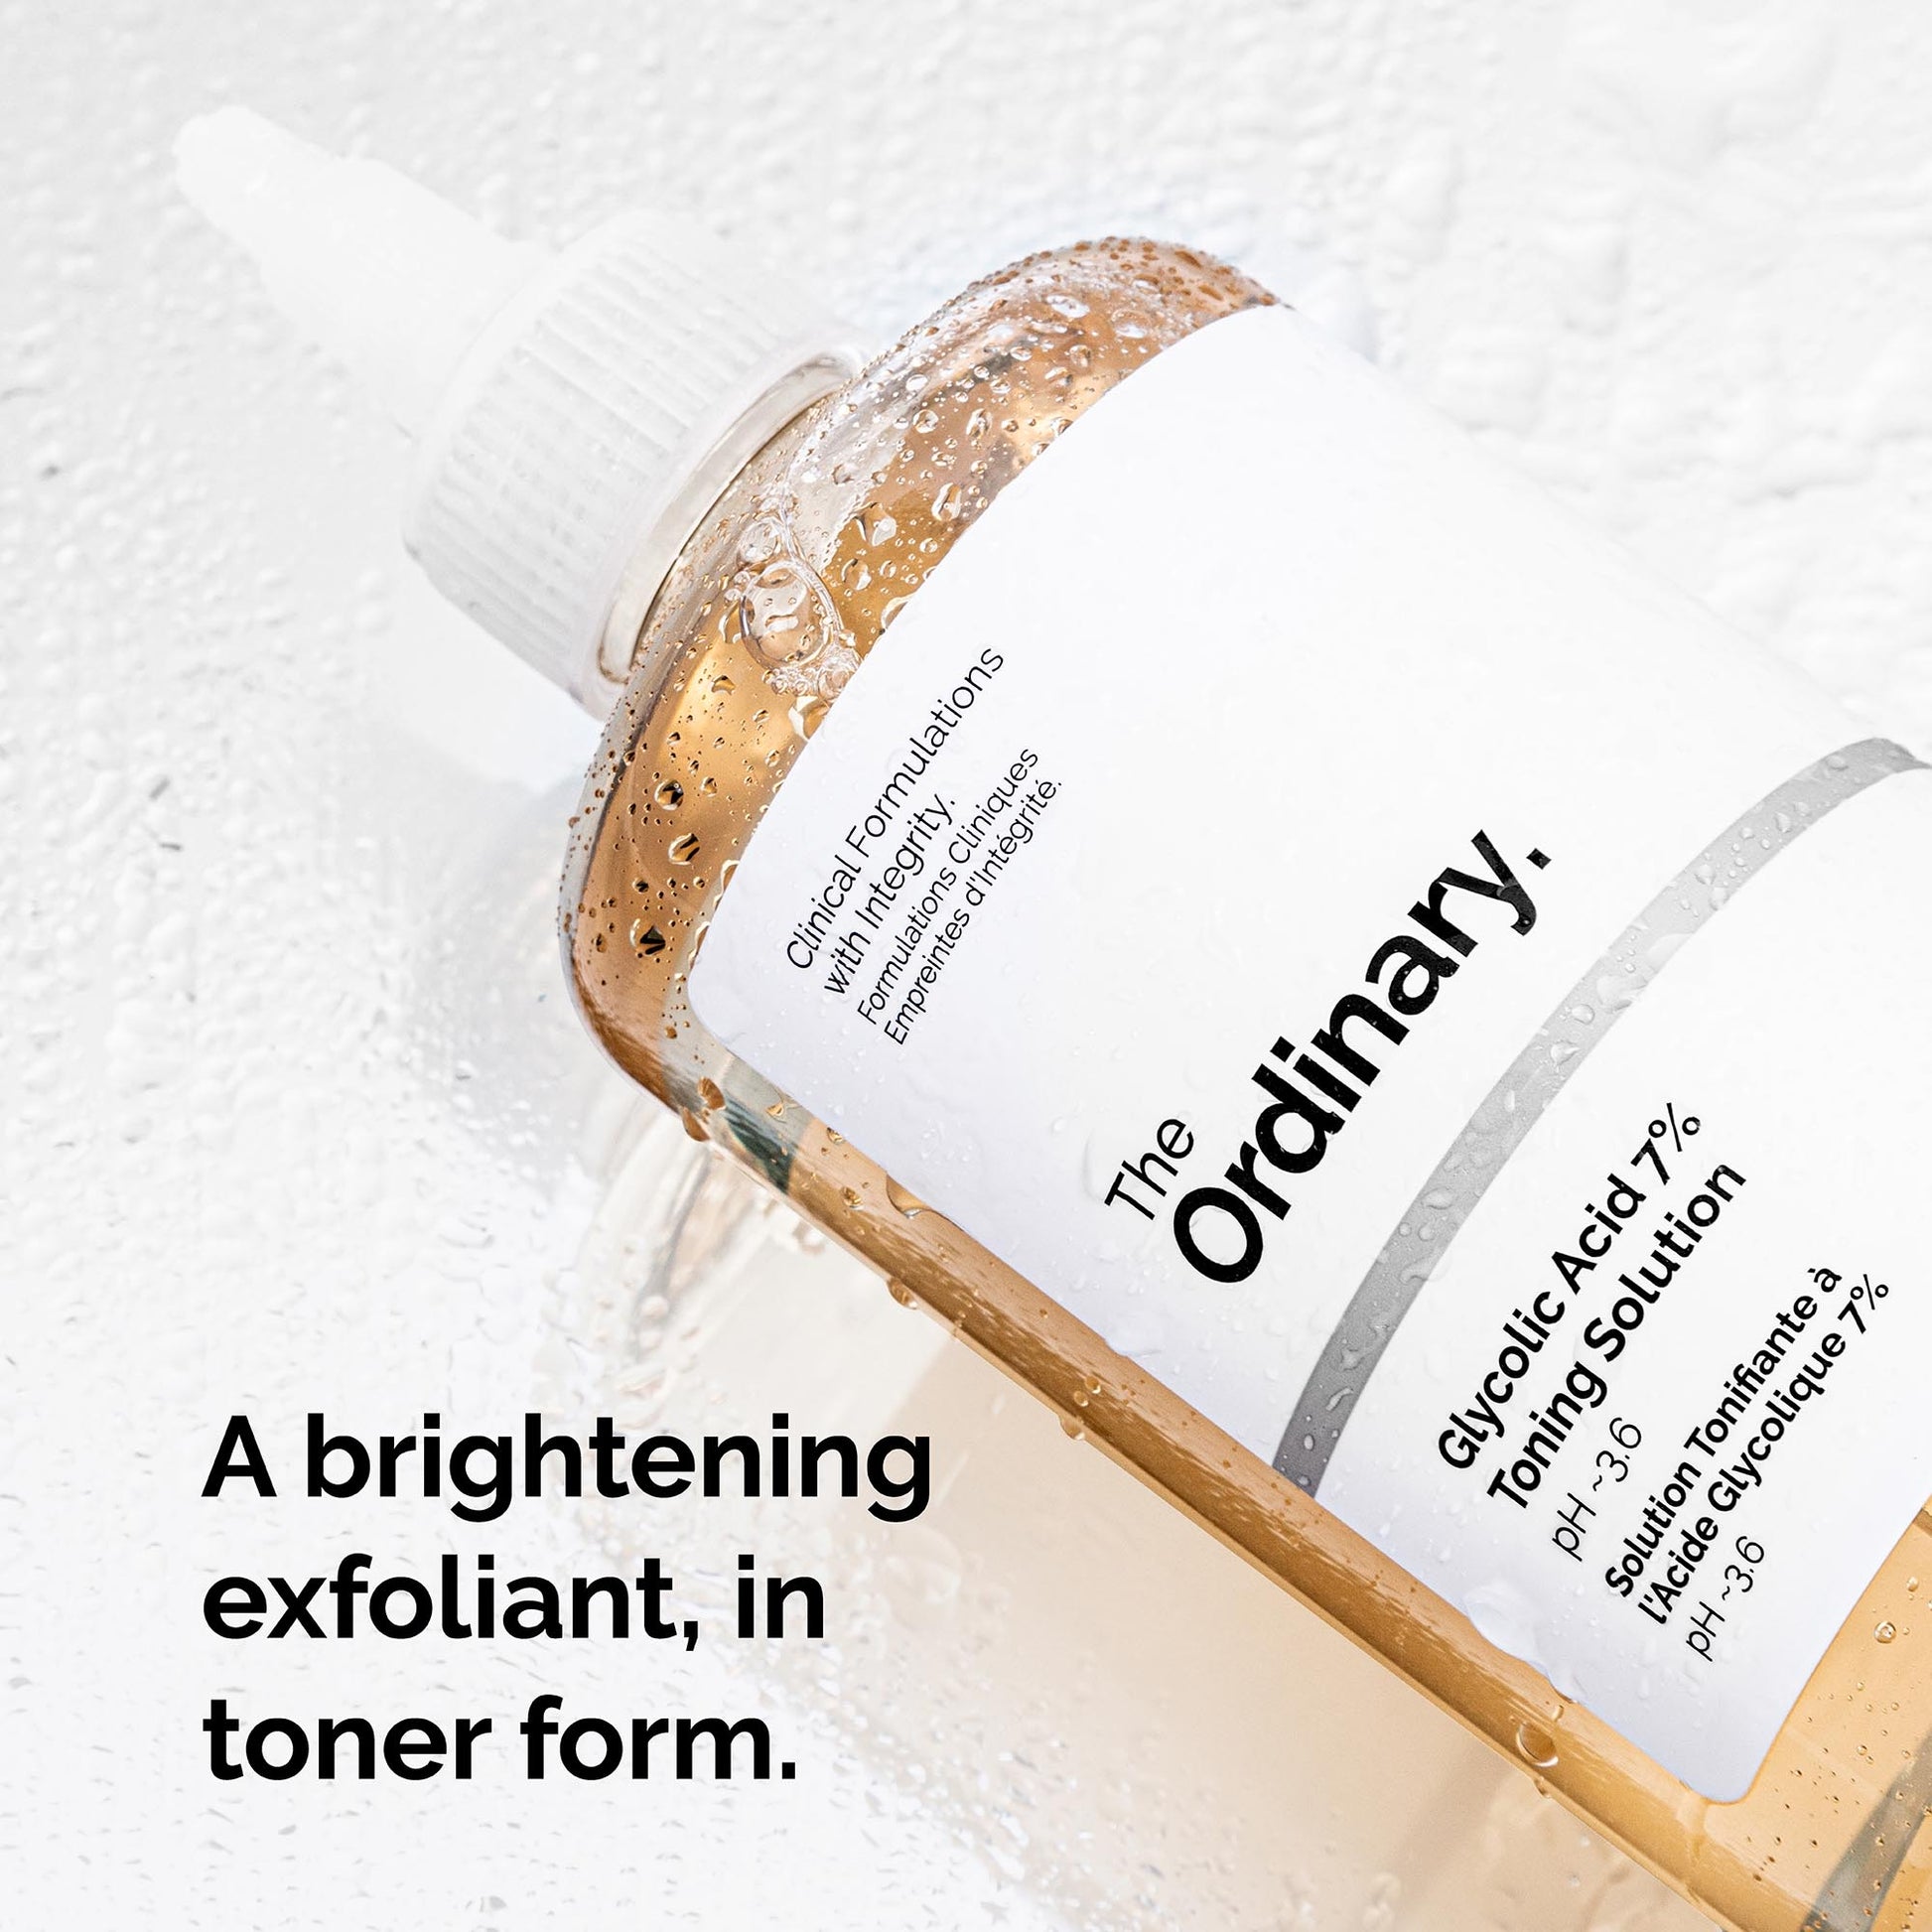 THE ORDINARY – Glycolic Acid 7% Solution Tonifiante – Sultana Luxe